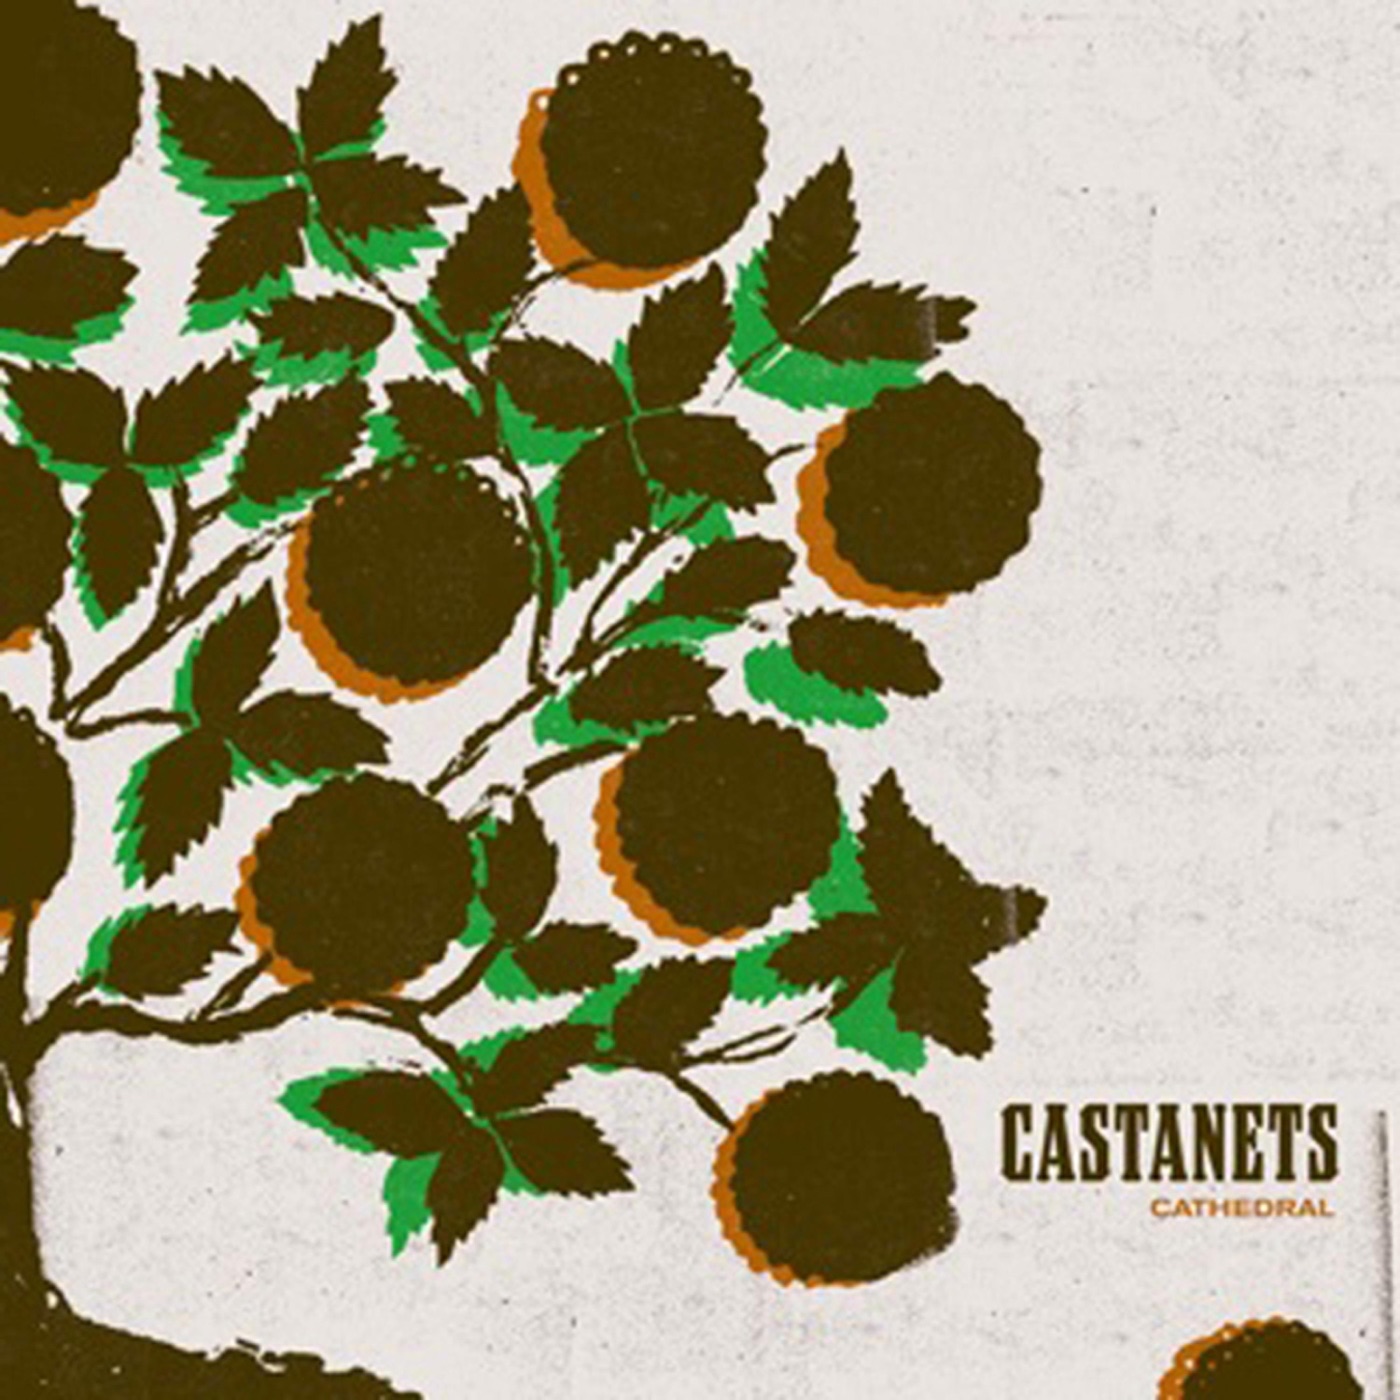 Cathedral by Castanets